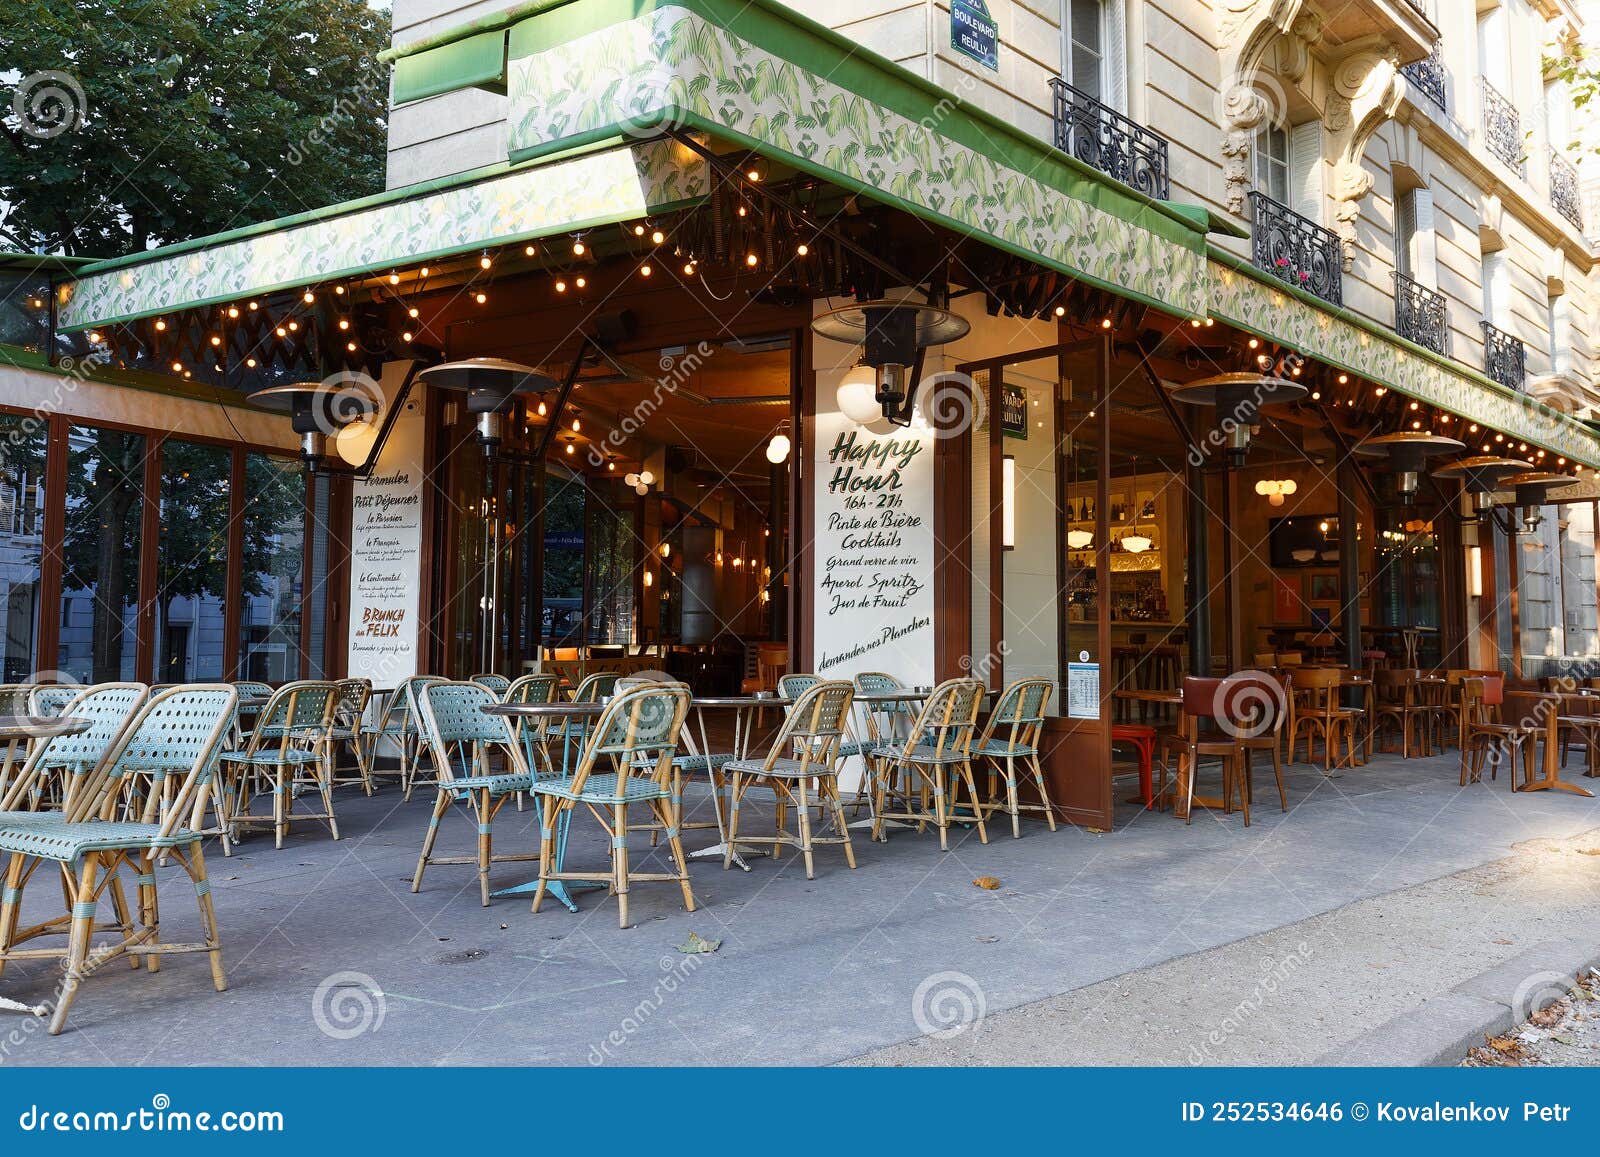 Located in the 12th District, the Felix Cafe Represents the Concept of ...